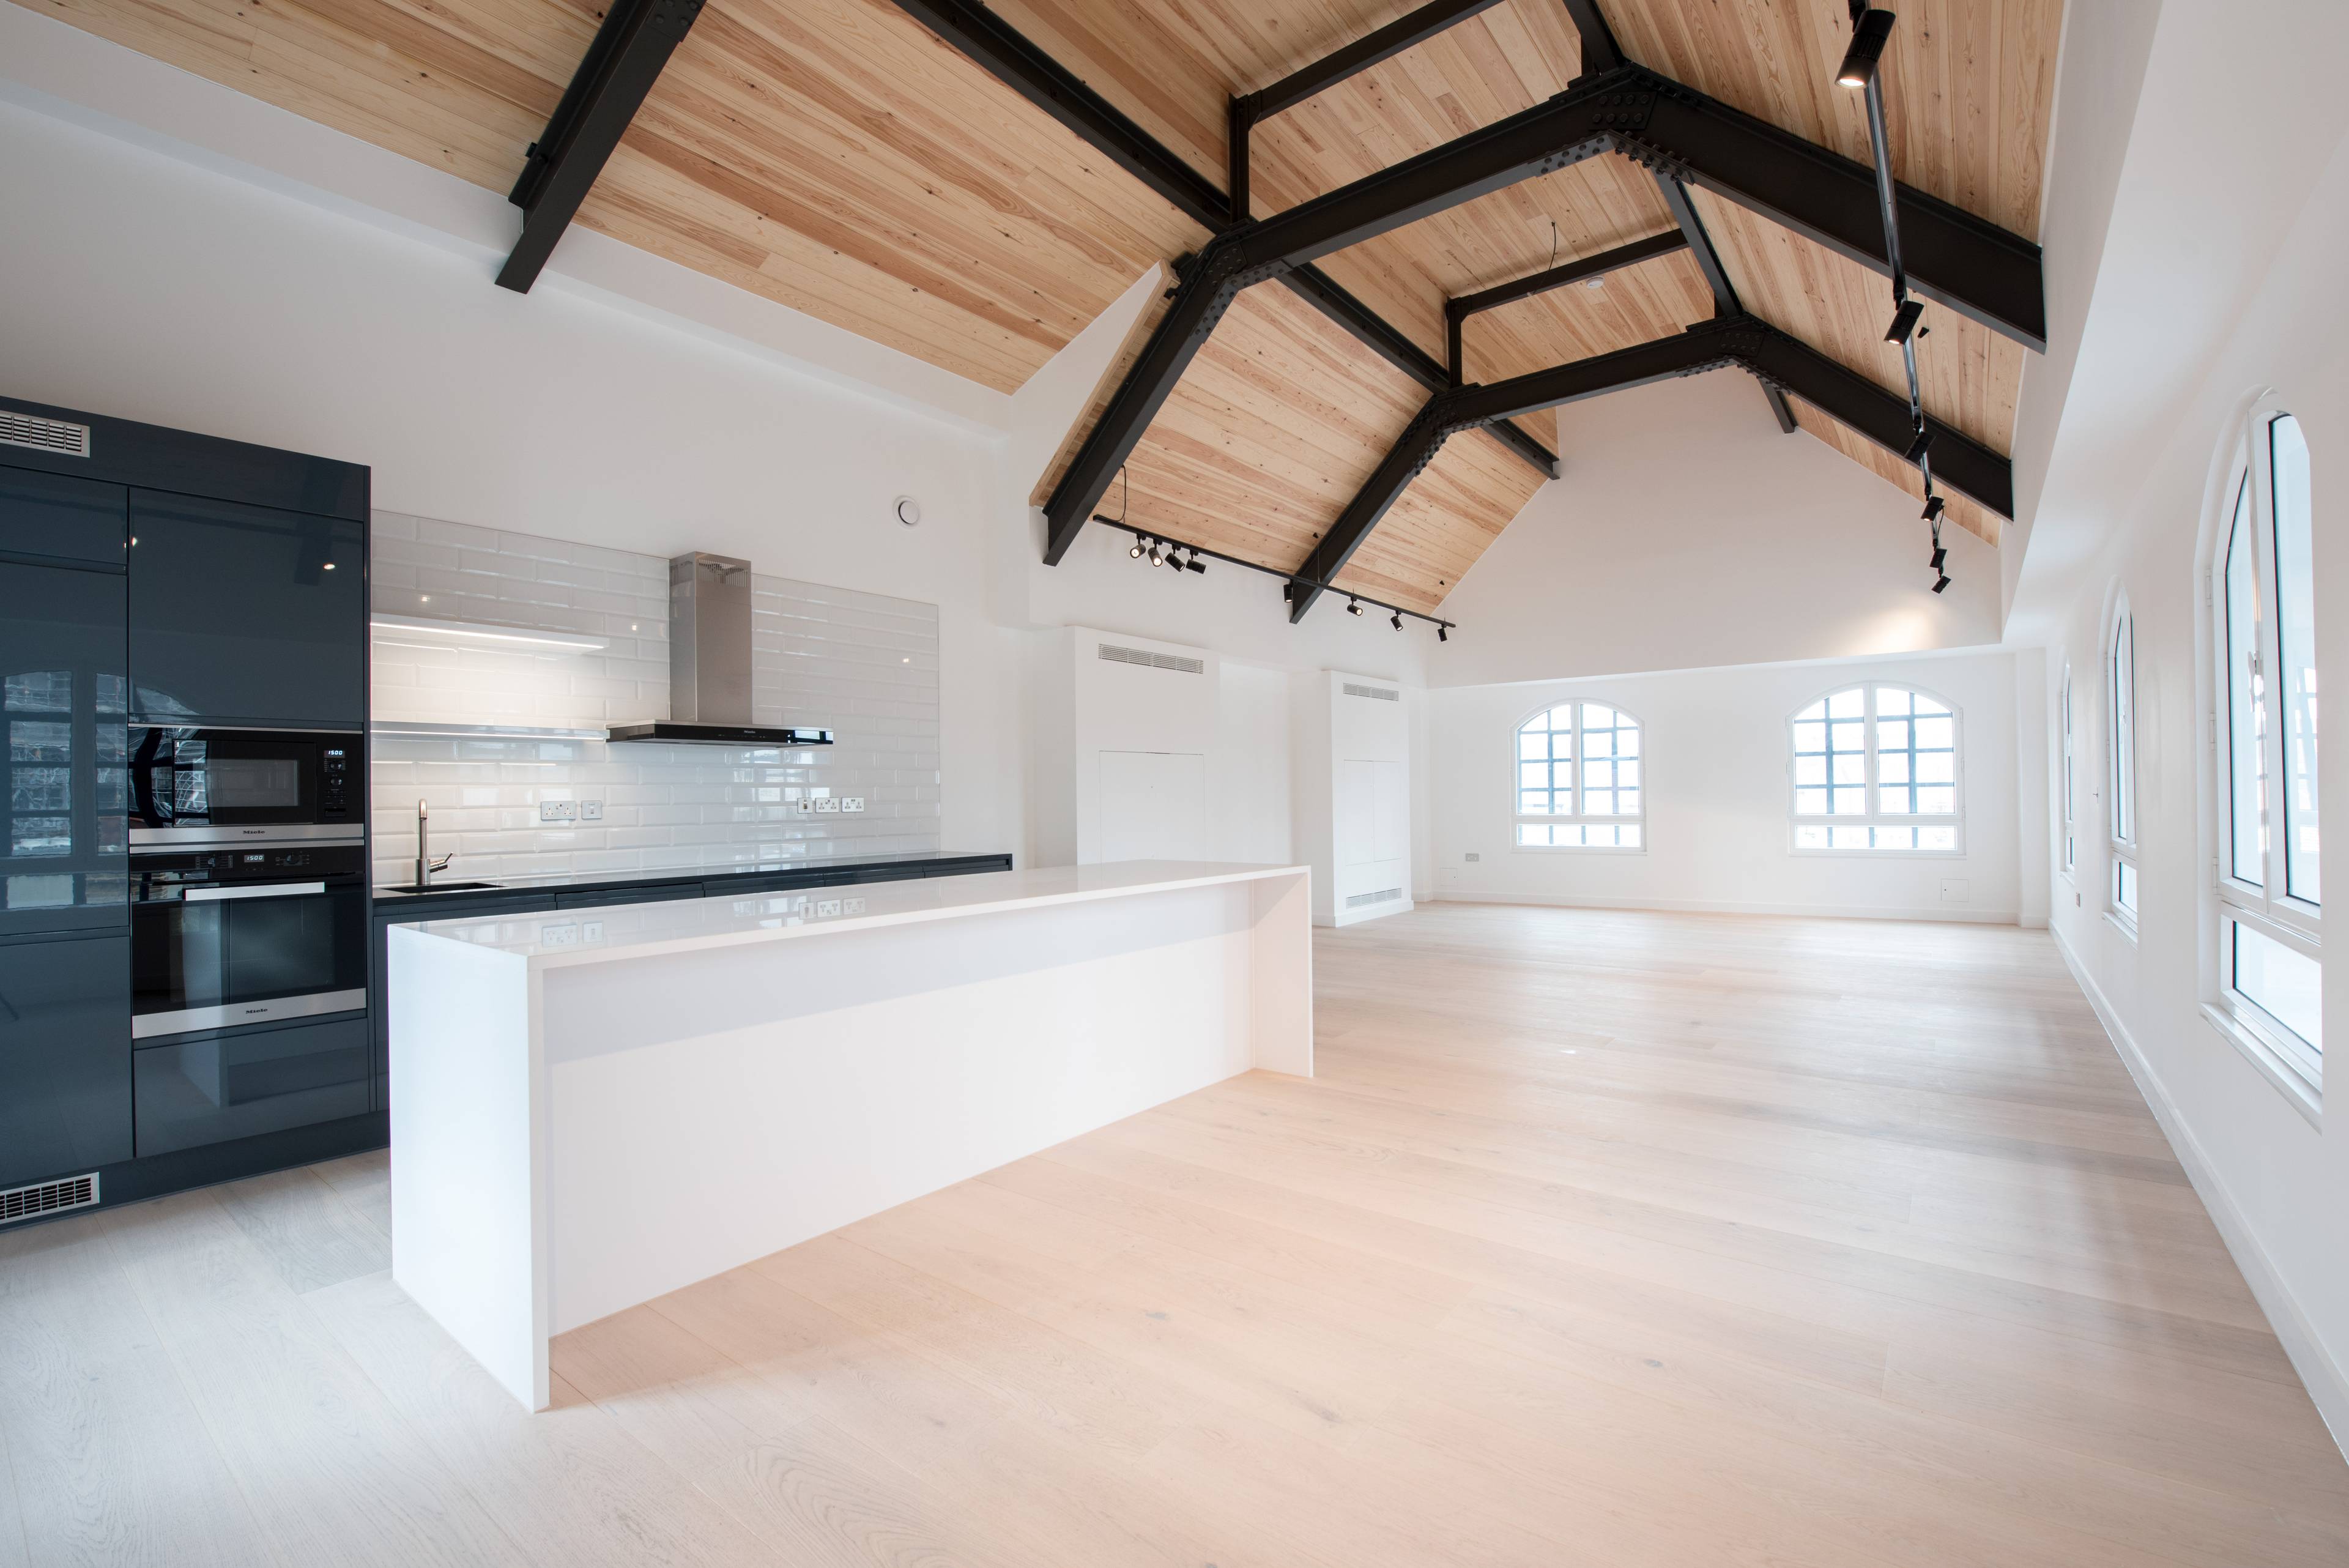 4 Bedroom Duplex Loft Penthouse in Coopers' Lofts, London's Oldest Converted Brewery